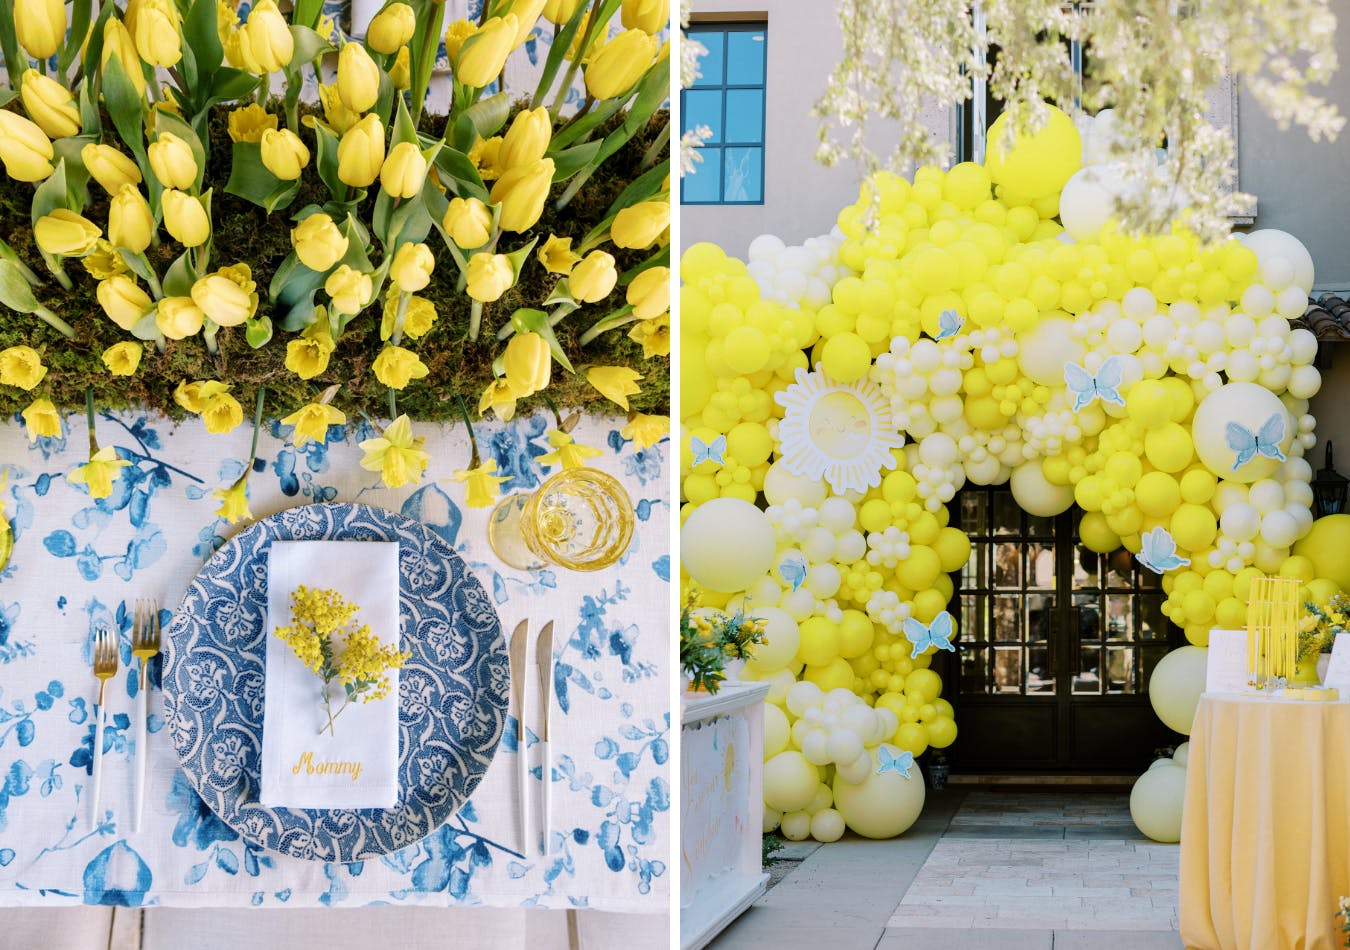 Baby shower with large yellow balloon installation at house entrance with blue butterflies and tulip garden centerpiece with blue tablecloth | PartySlate